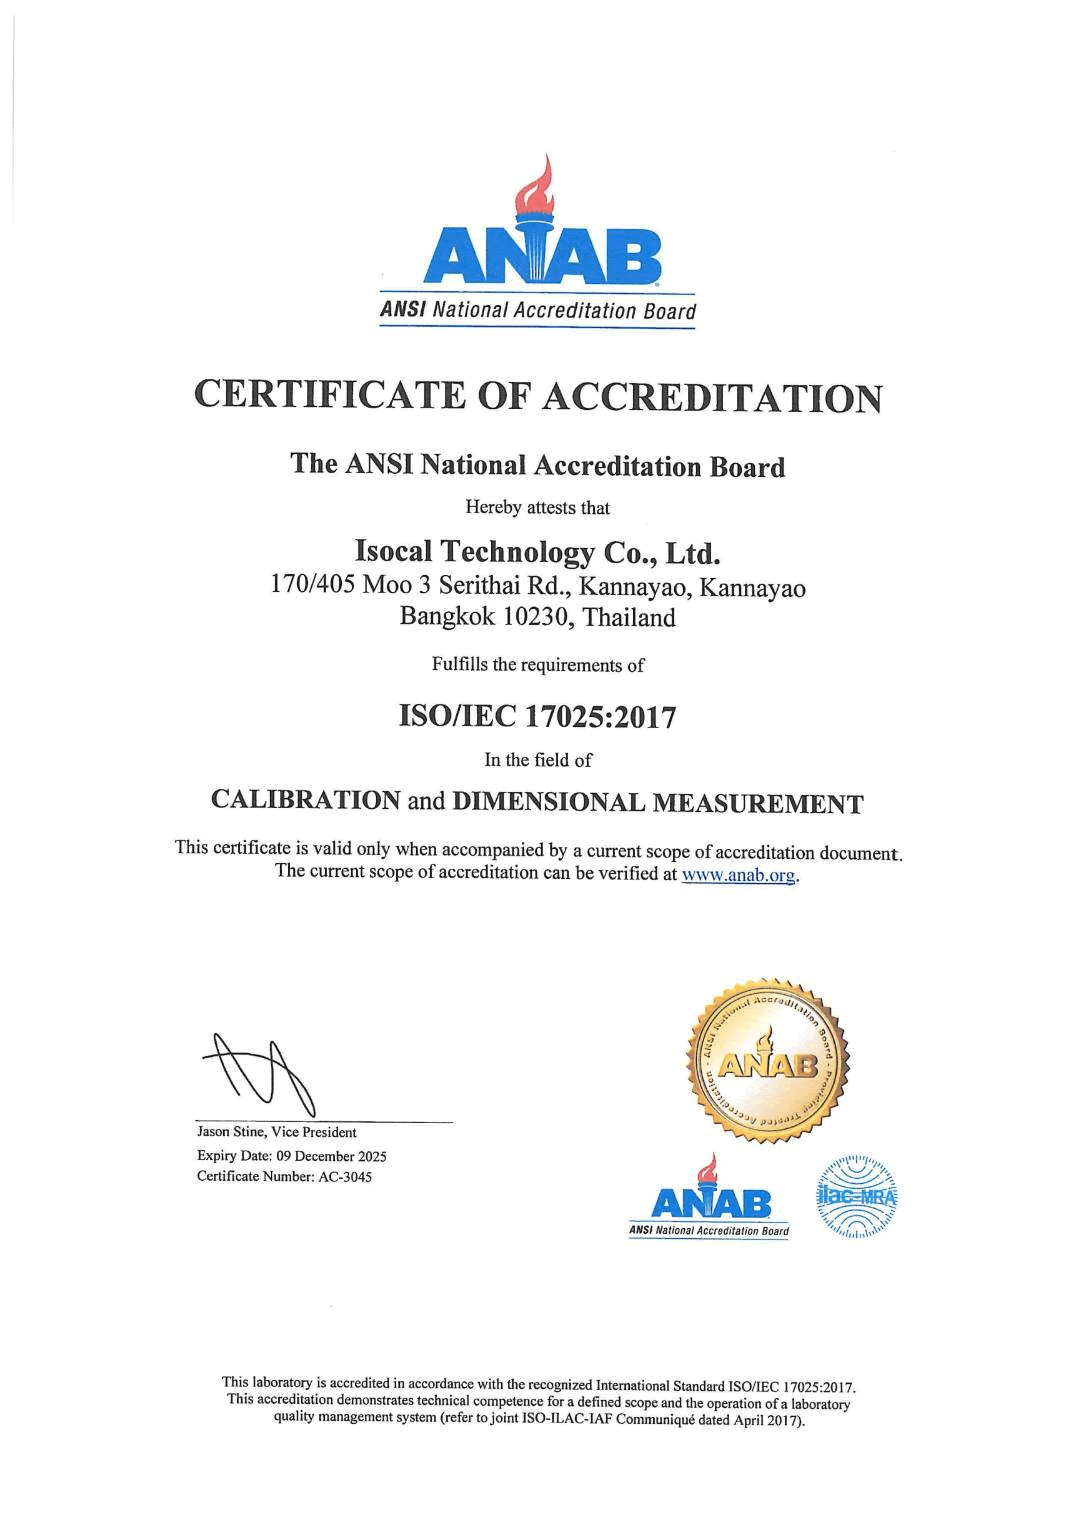 ANAB Certificate